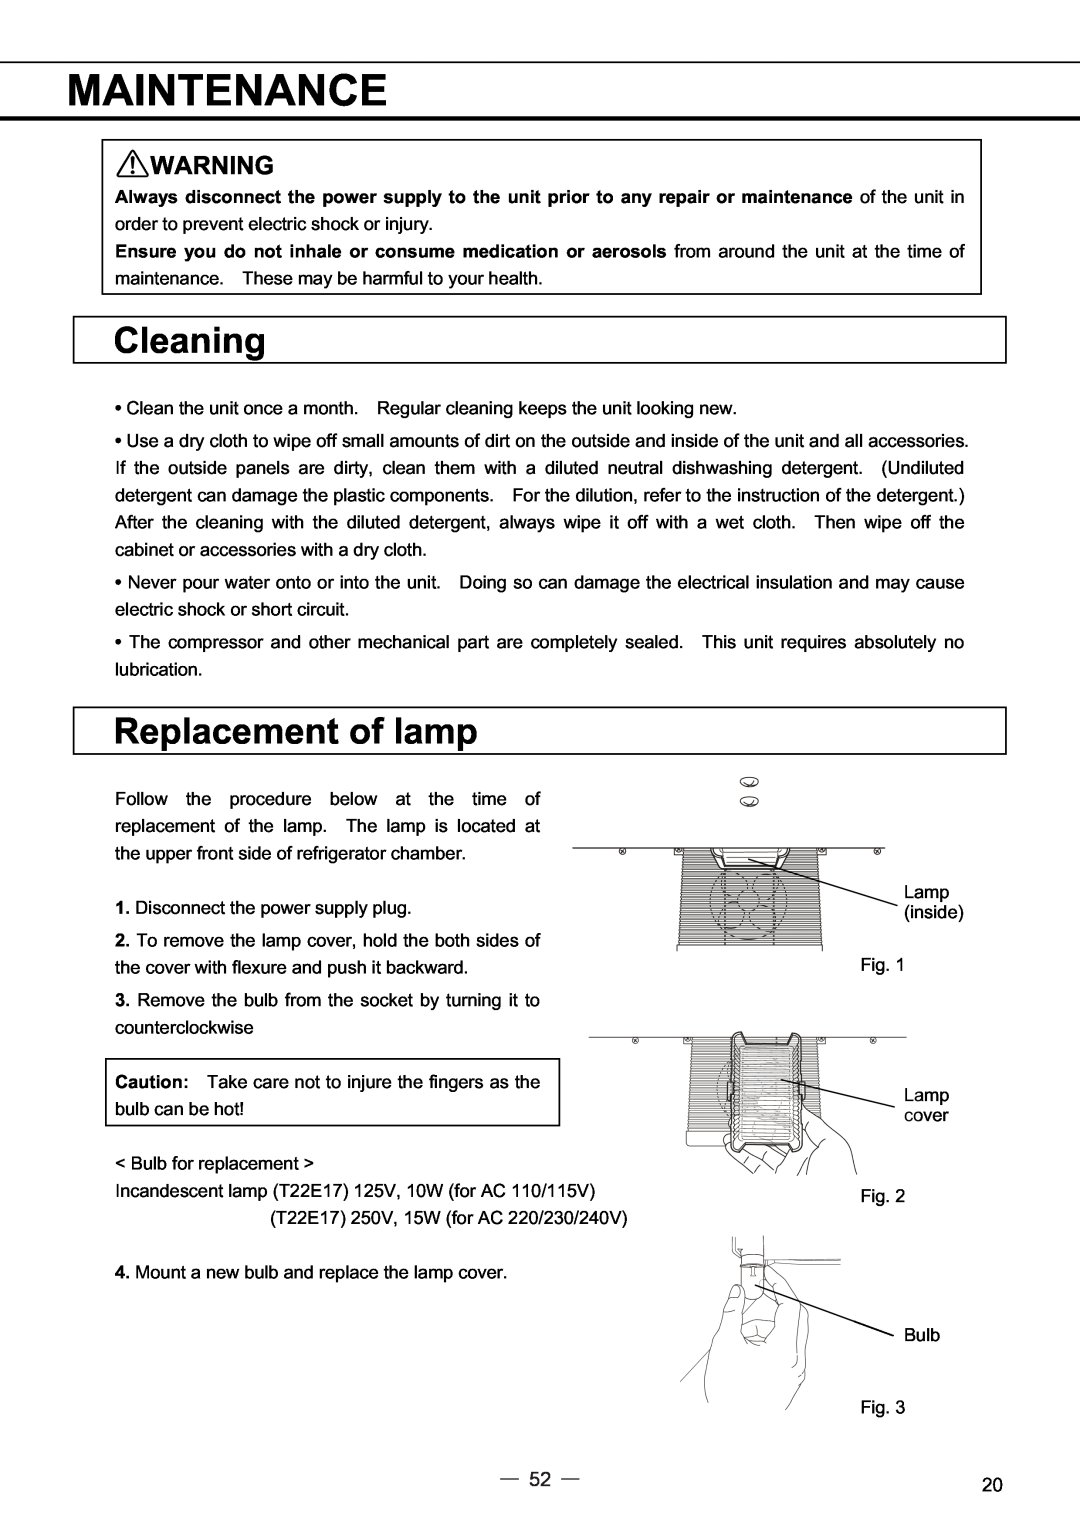 Sanyo MPR-414FS instruction manual Maintenance, Cleaning, Replacement of lamp 